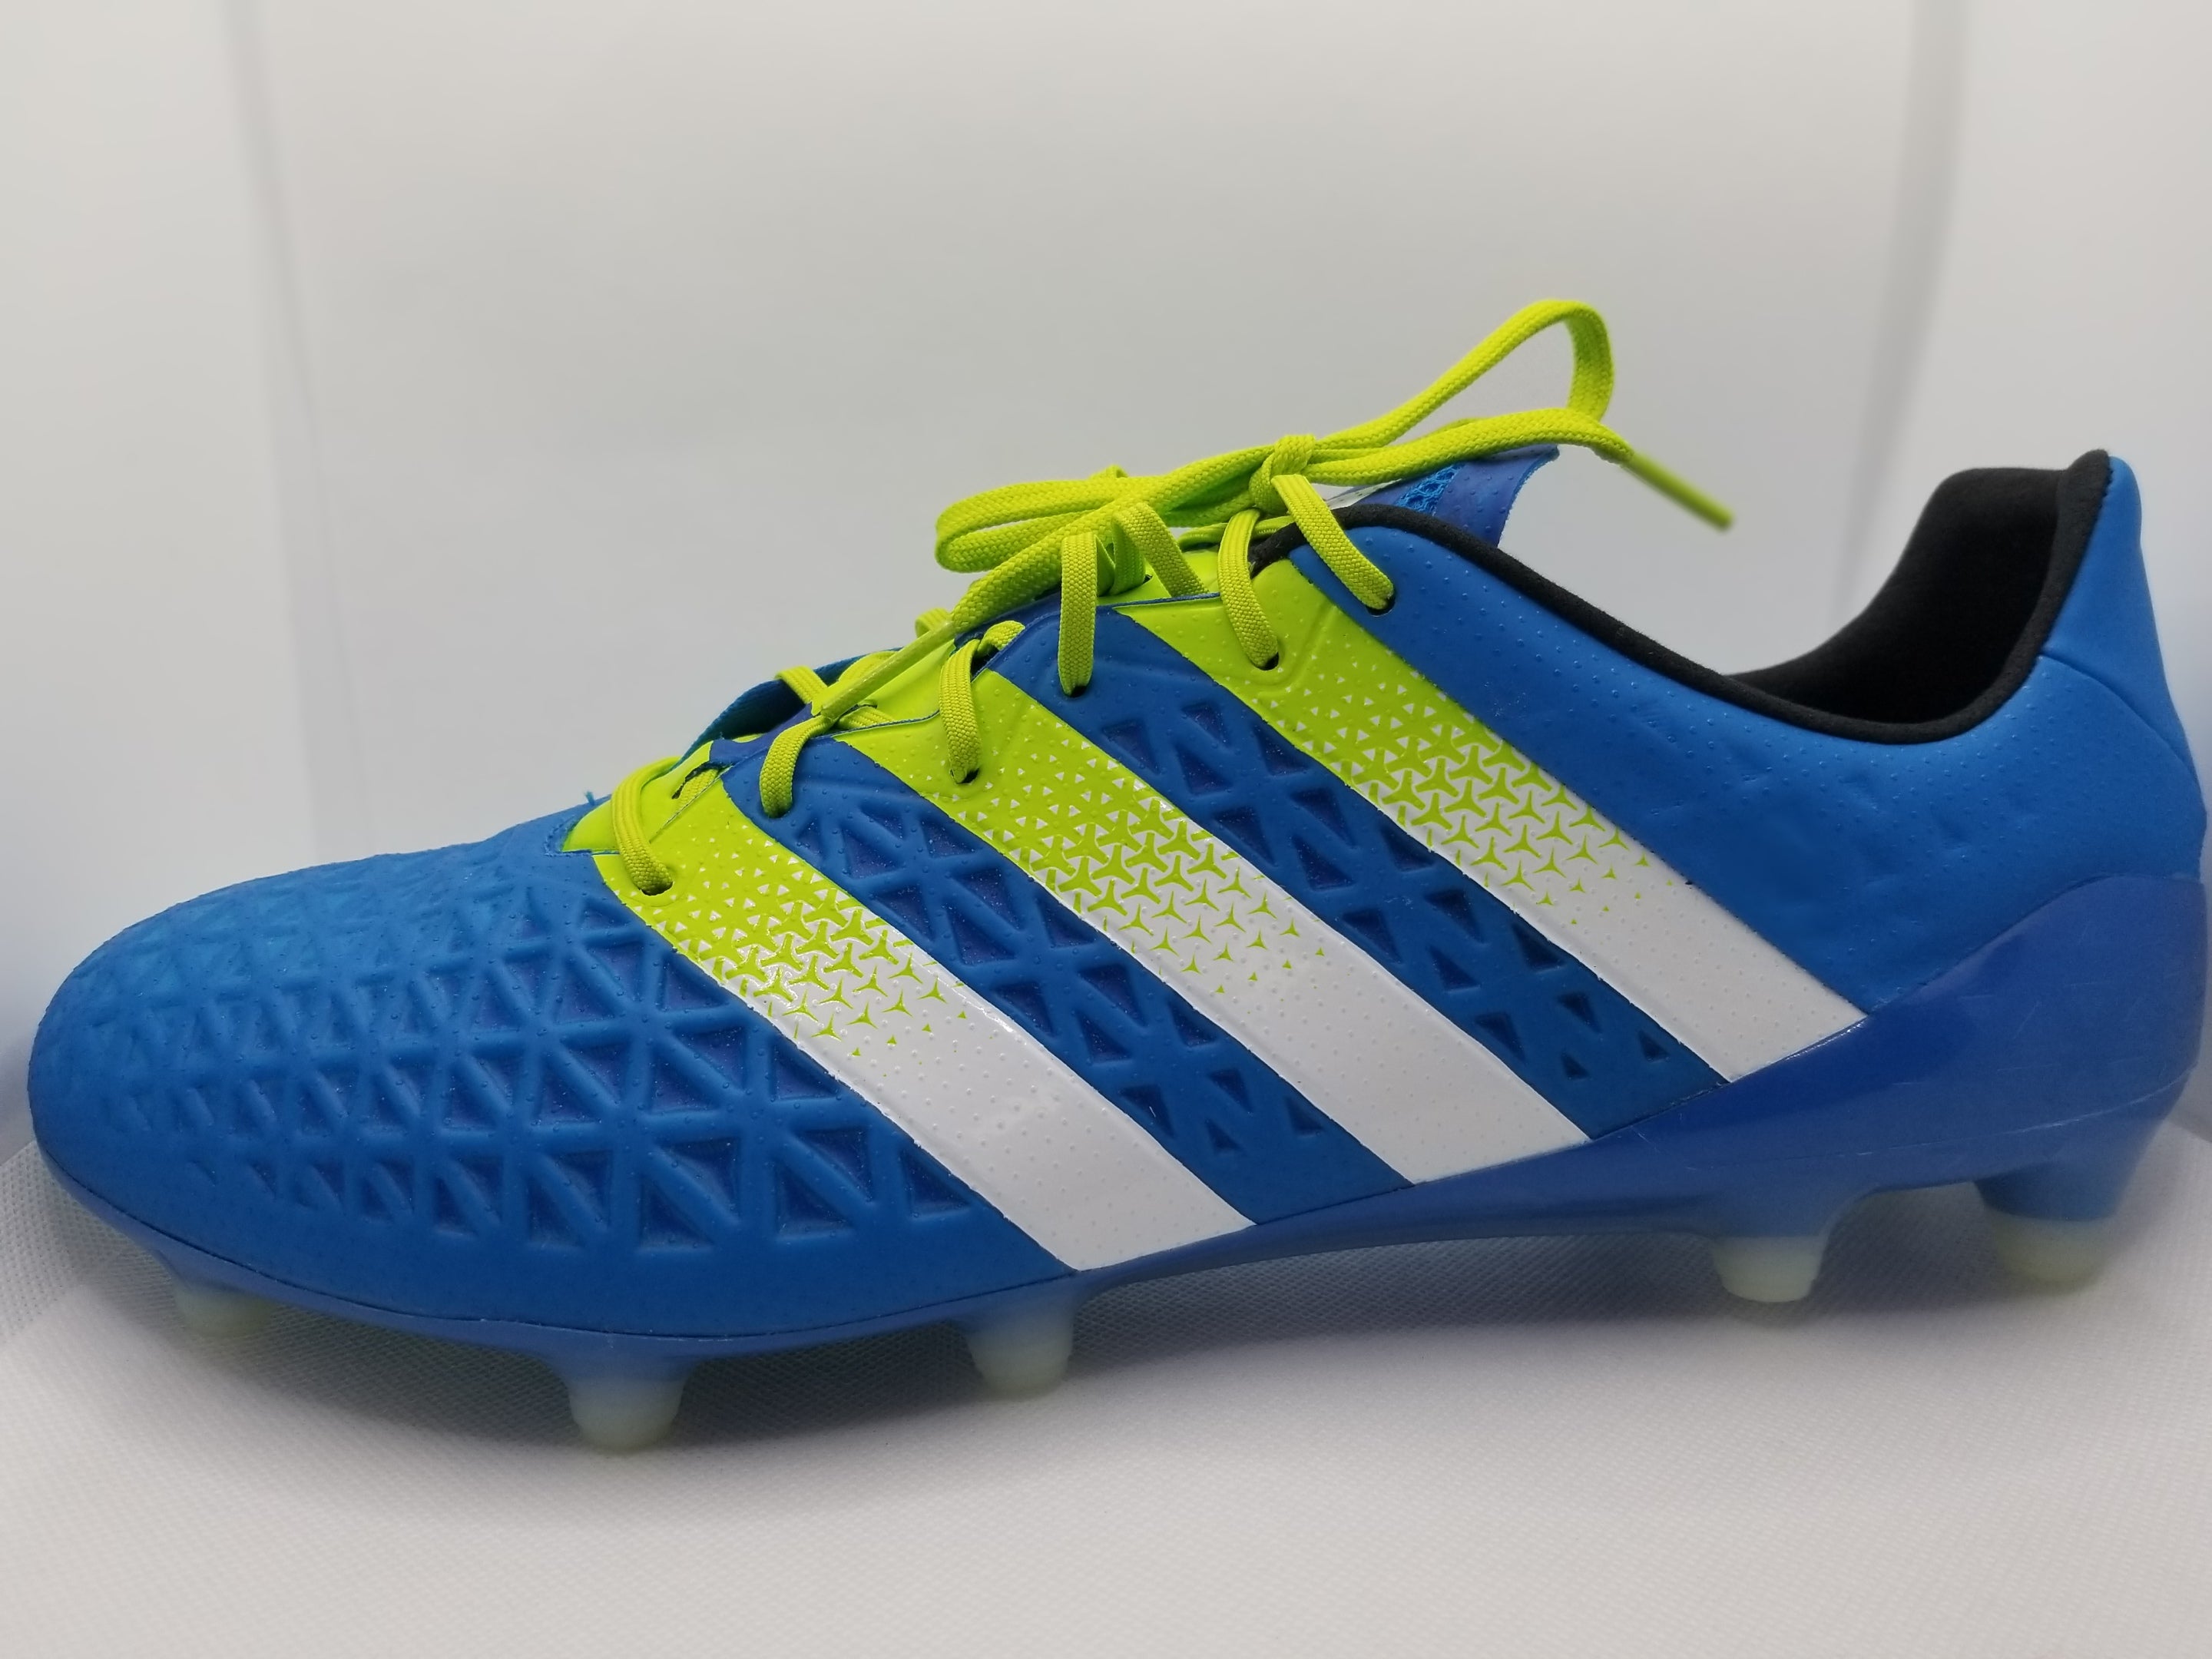 Adidas Ace 16.1 Boots